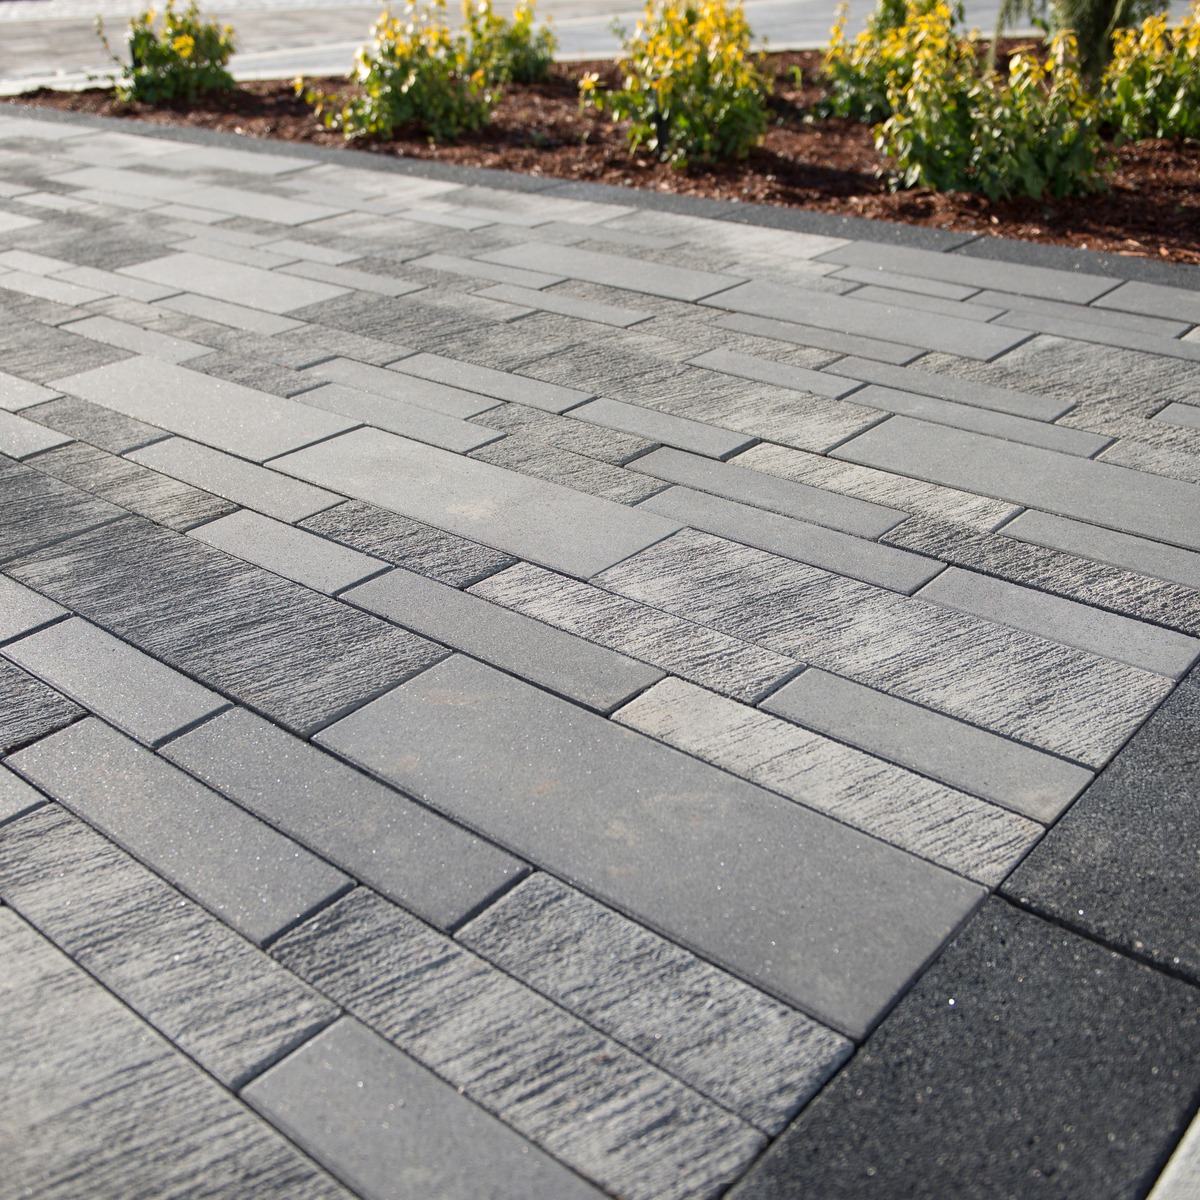 Paver Stone Patio with different surface textures